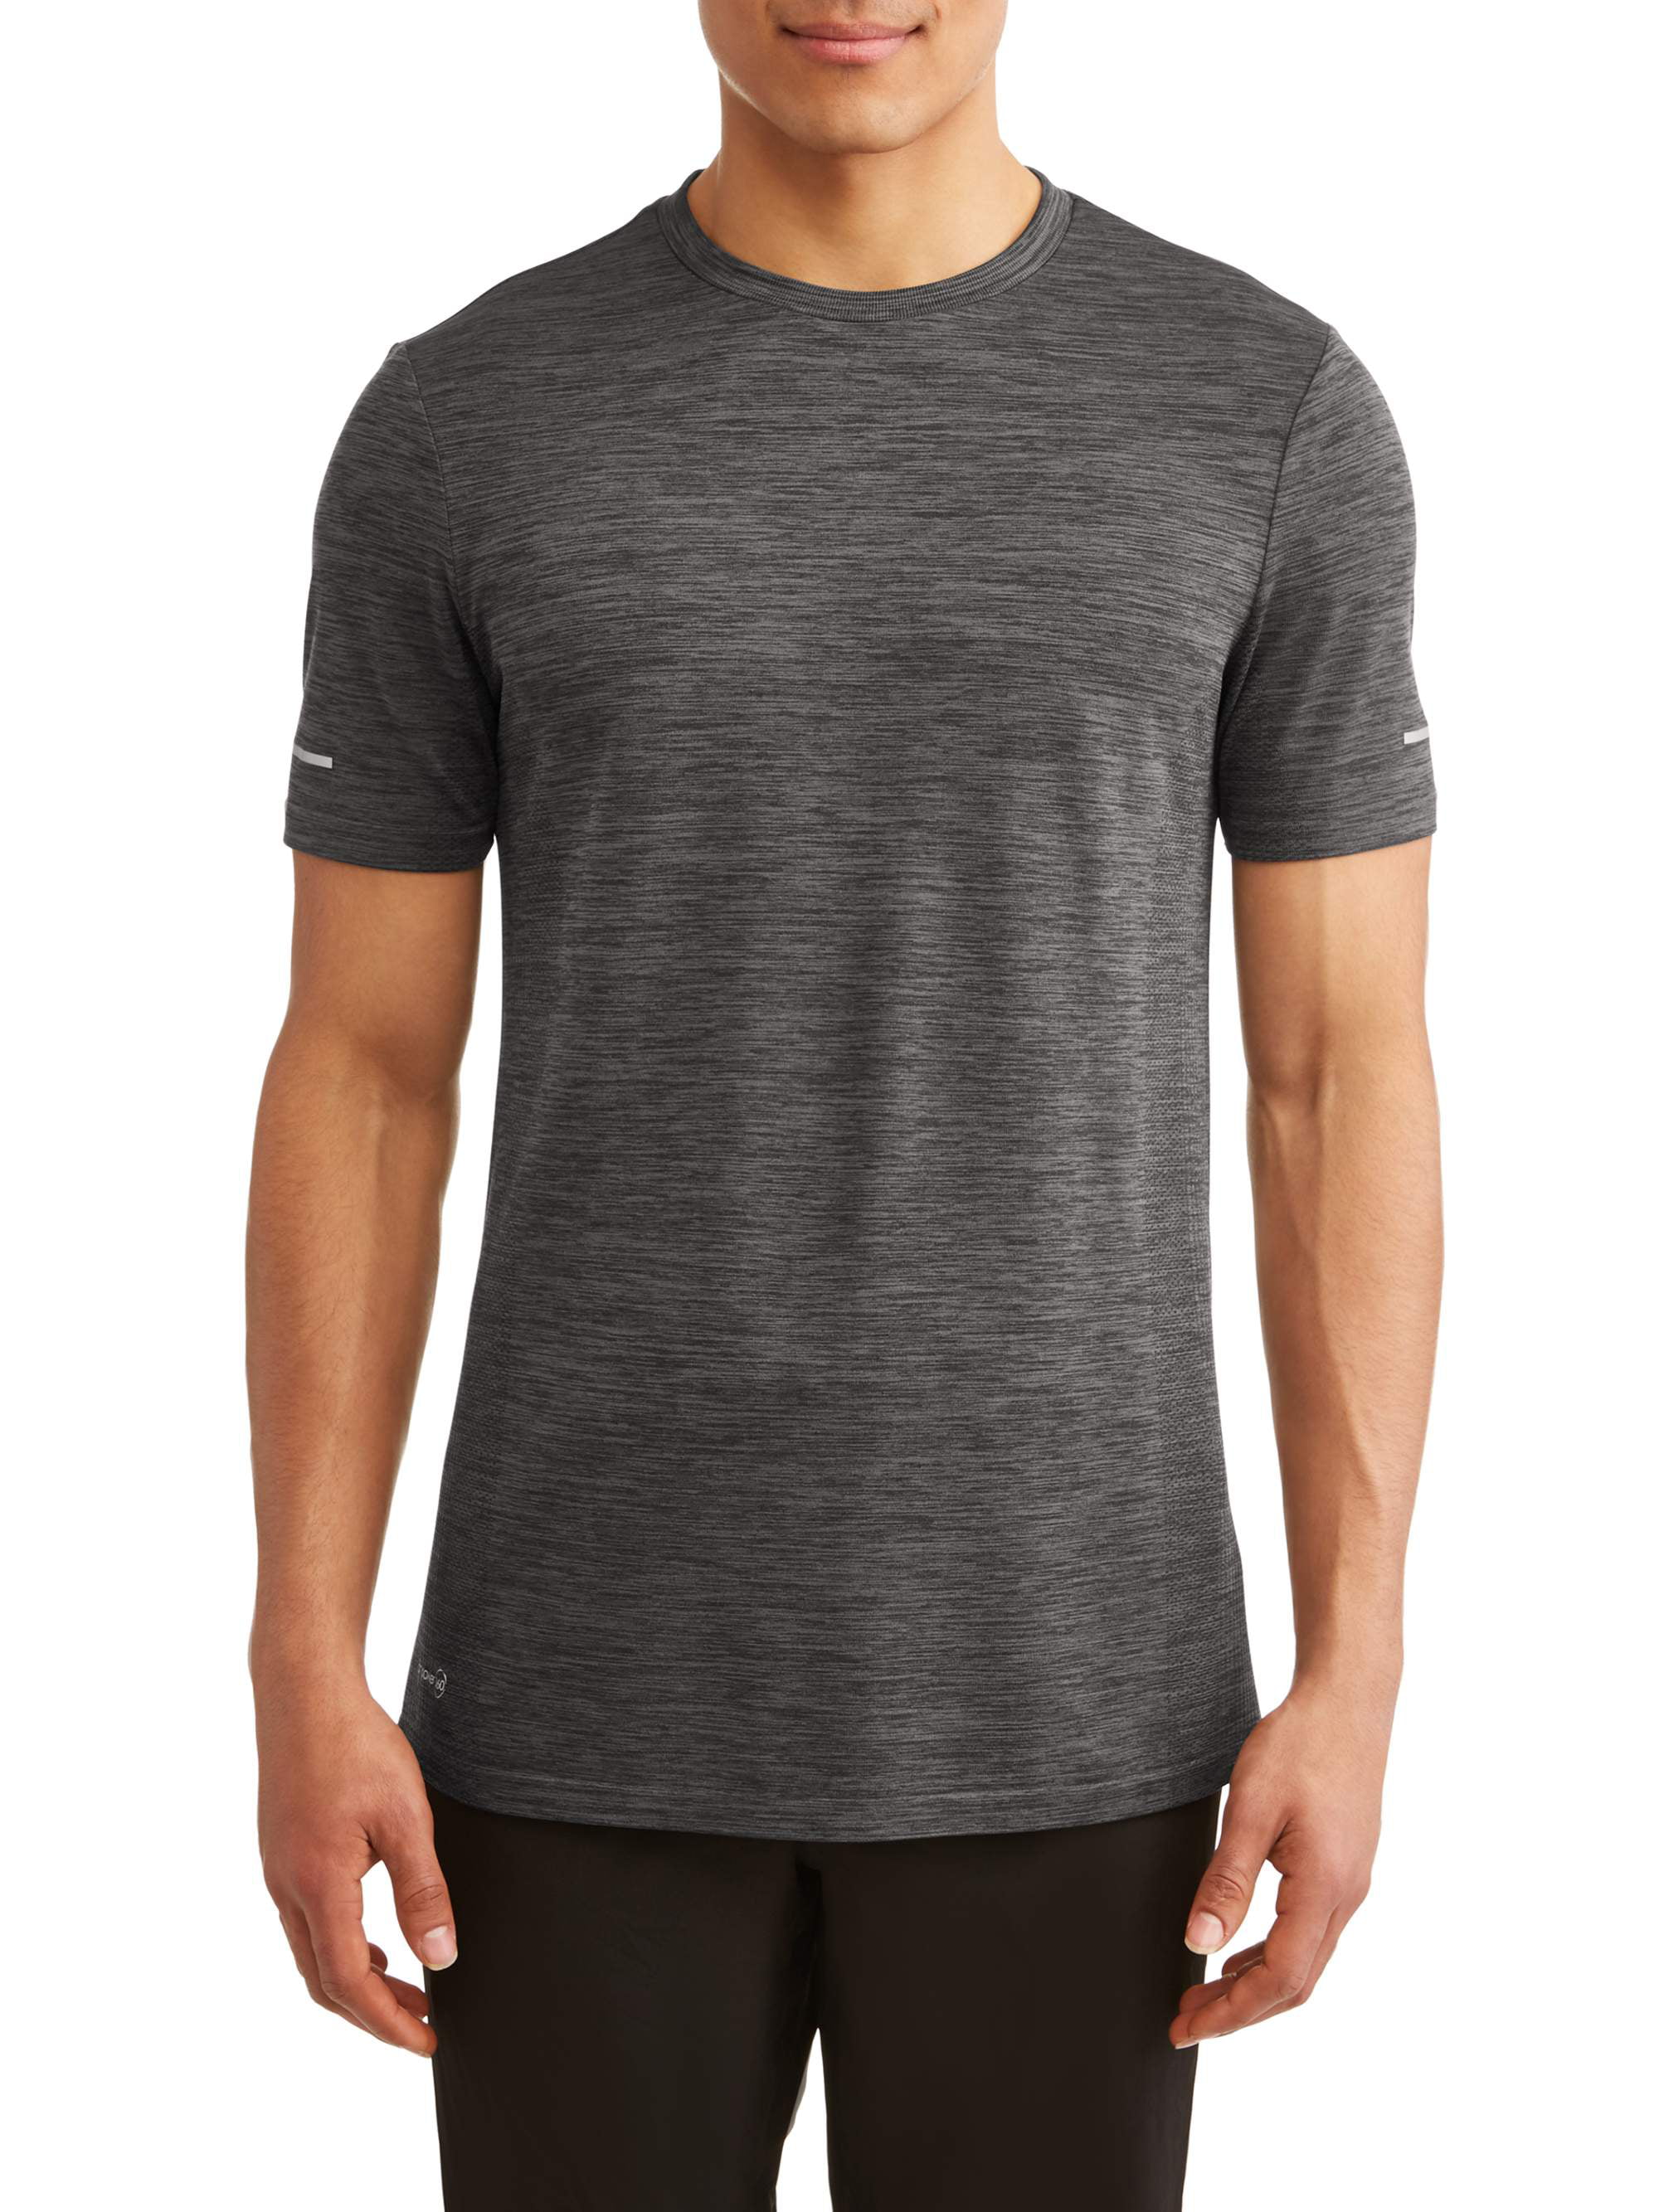 Russell Men's Seamless Performance Short Sleeve Tee, Up to 2XL ...